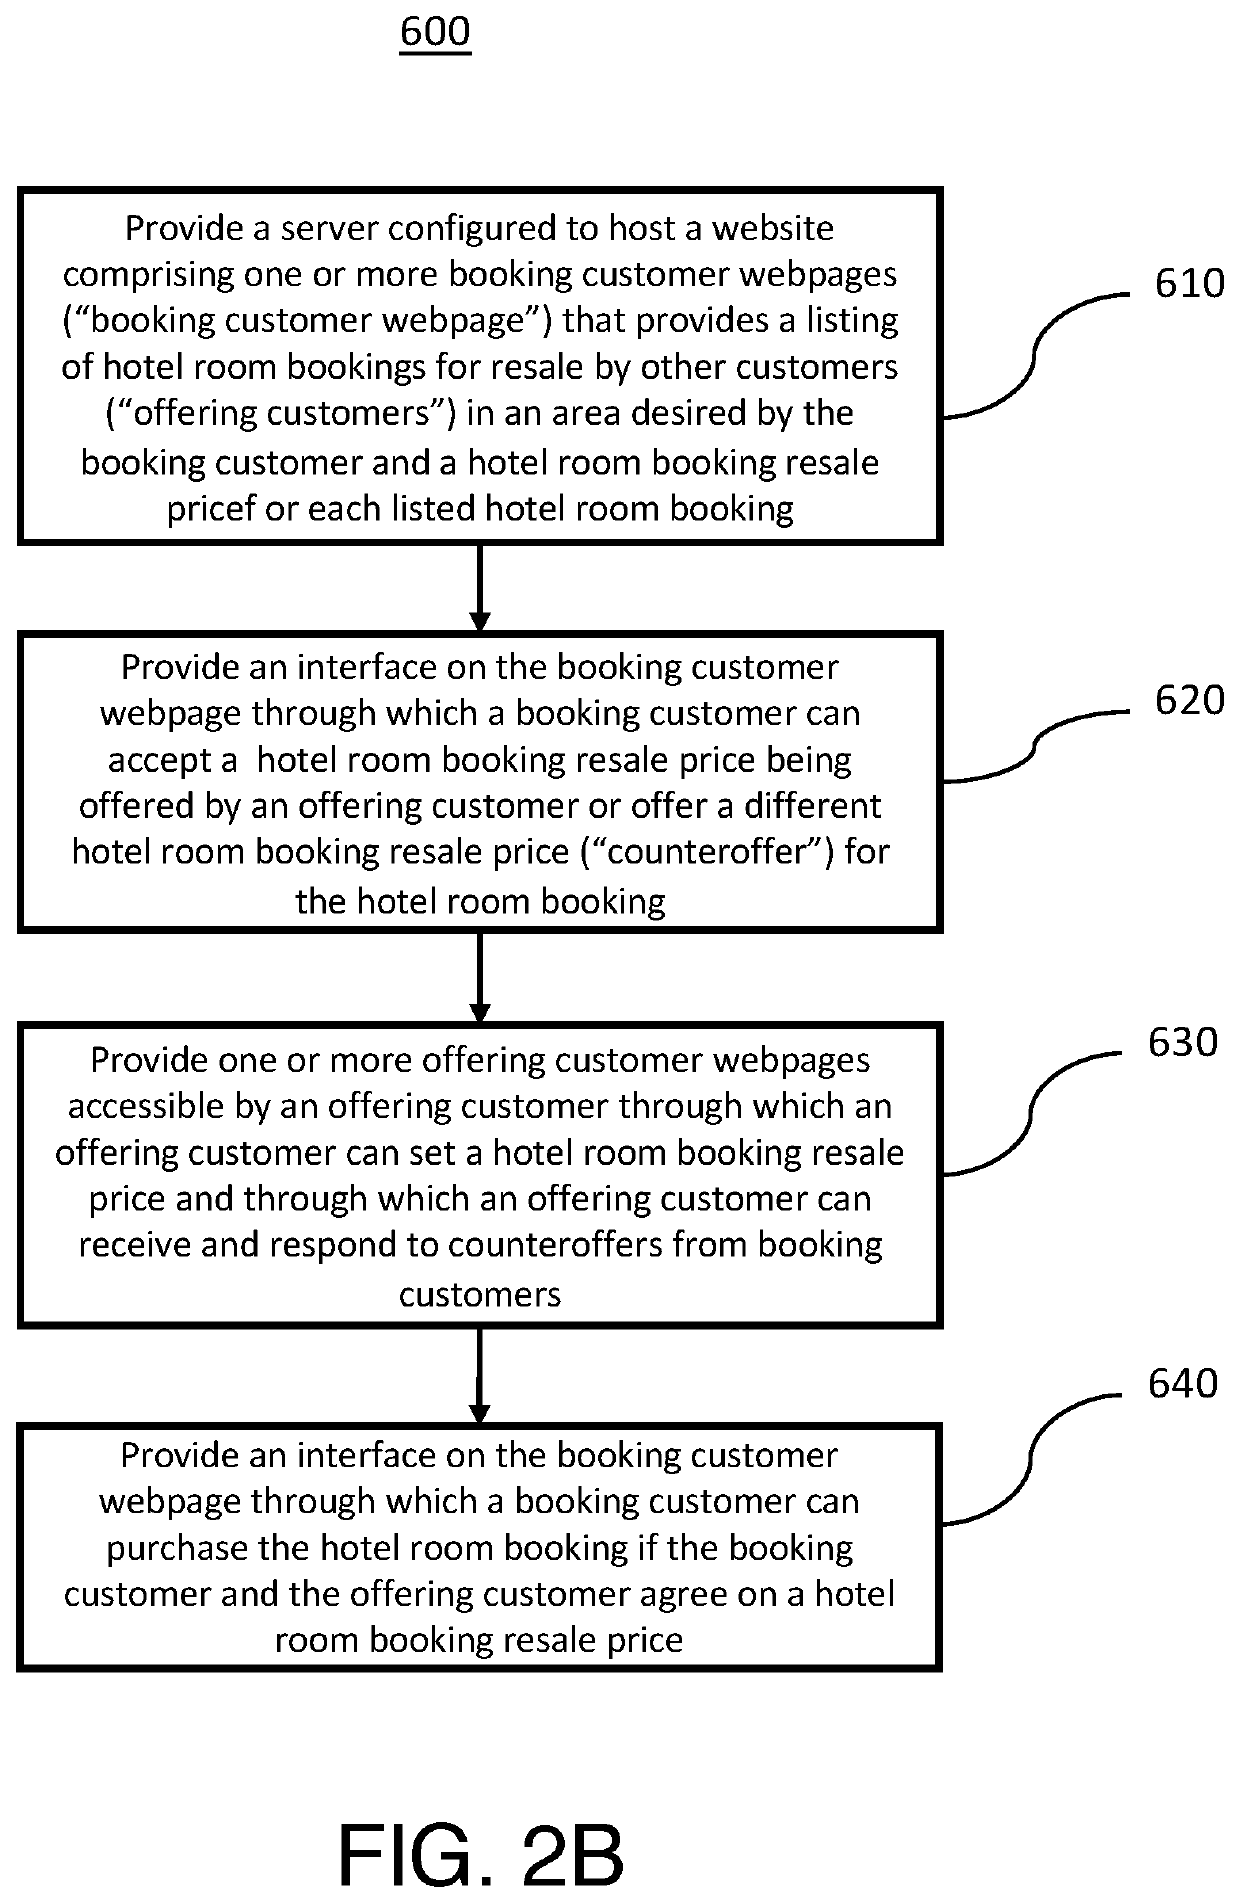 System and method for creating an online exchange between lodging seekers and lodging providers for negotiating the price of rooms